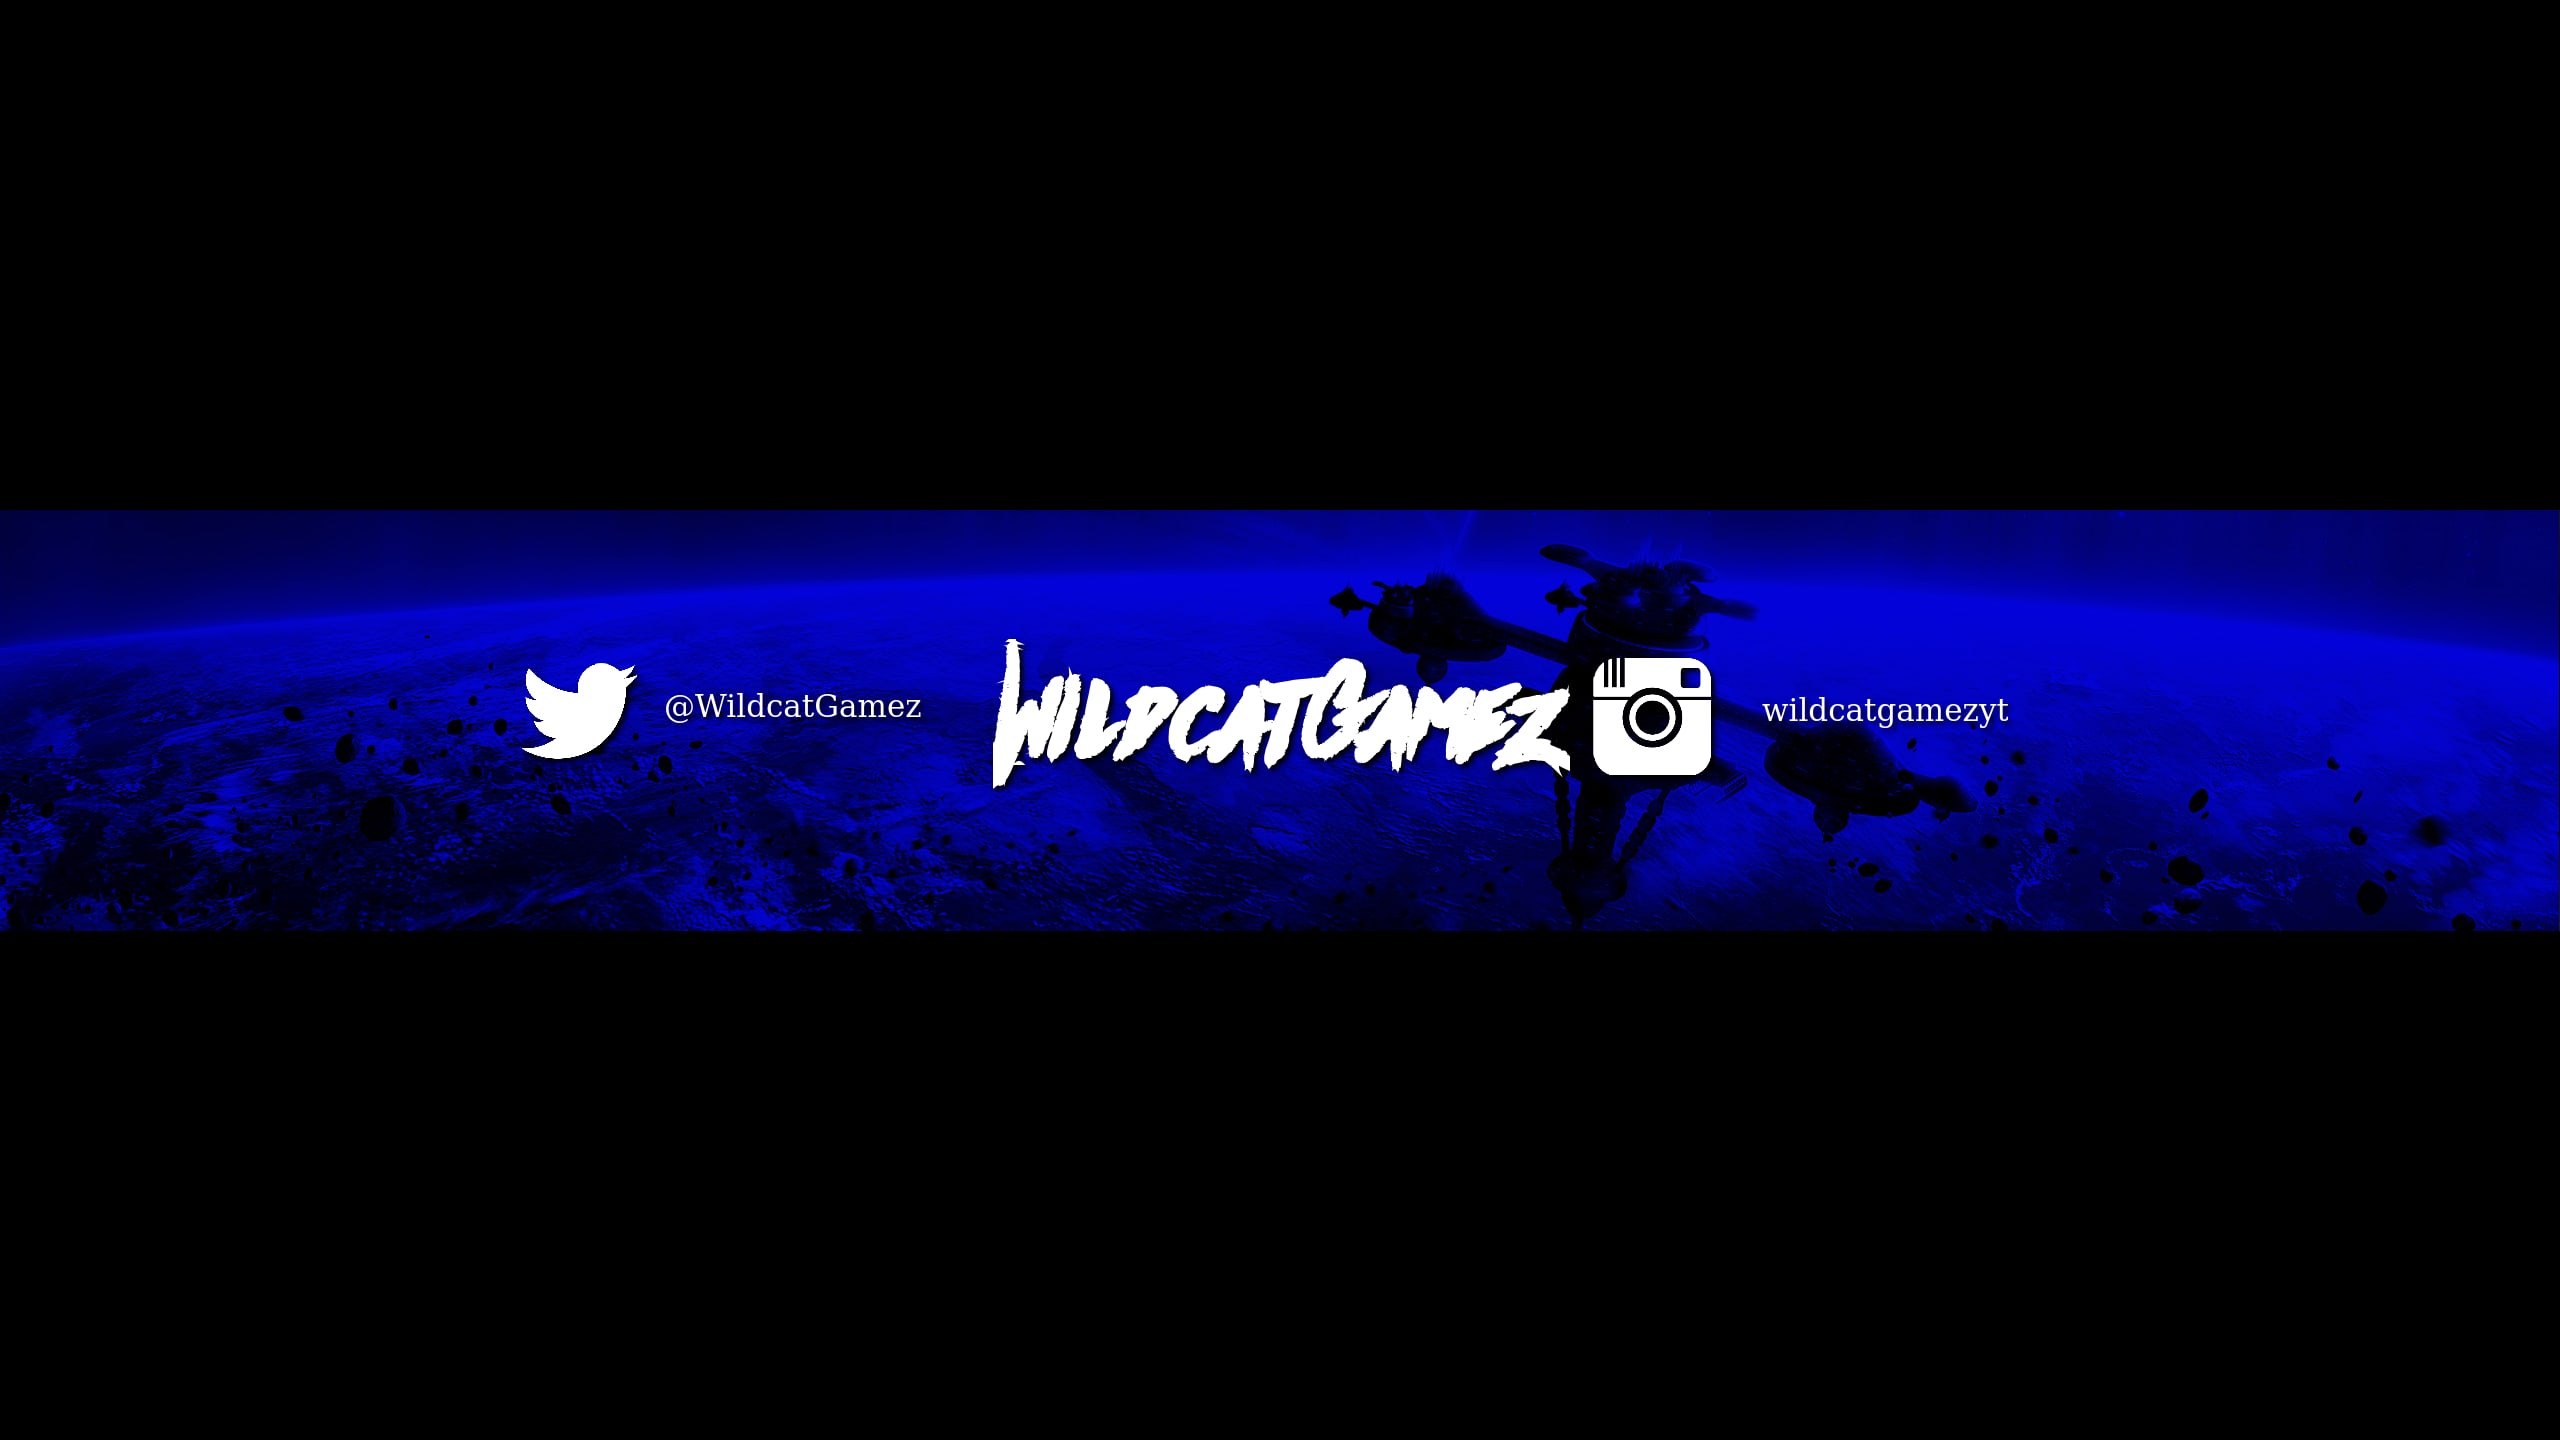 Make Outstanding And Cool Youtube Avatars And Banners By Wildcatgamez